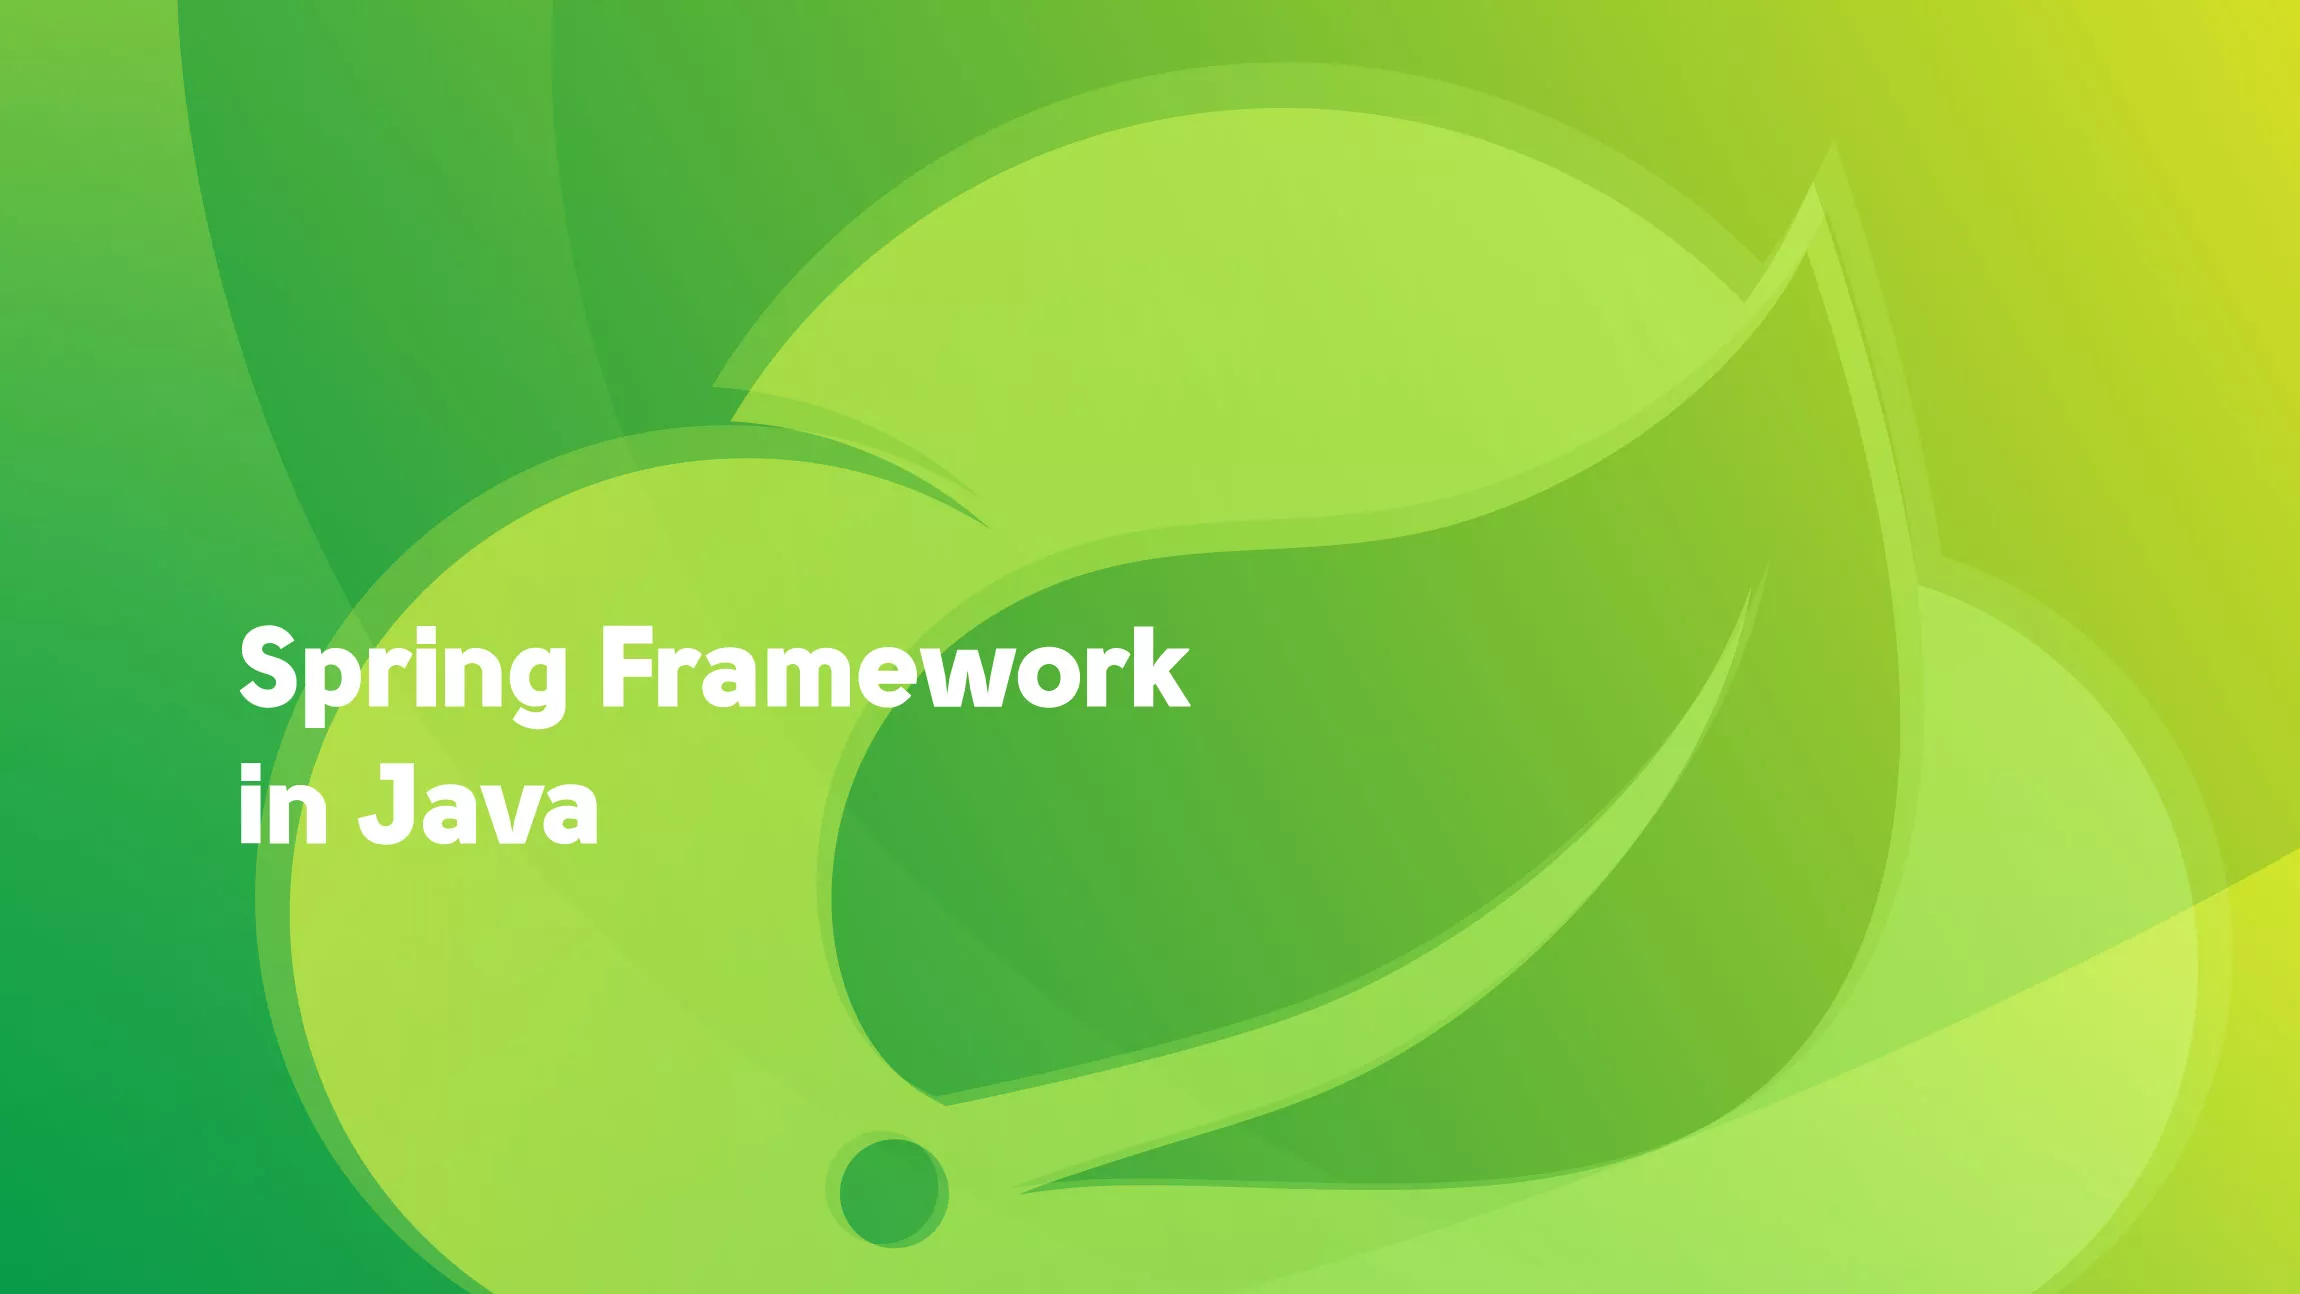 Spring Framework in Java - why is it worth your attention